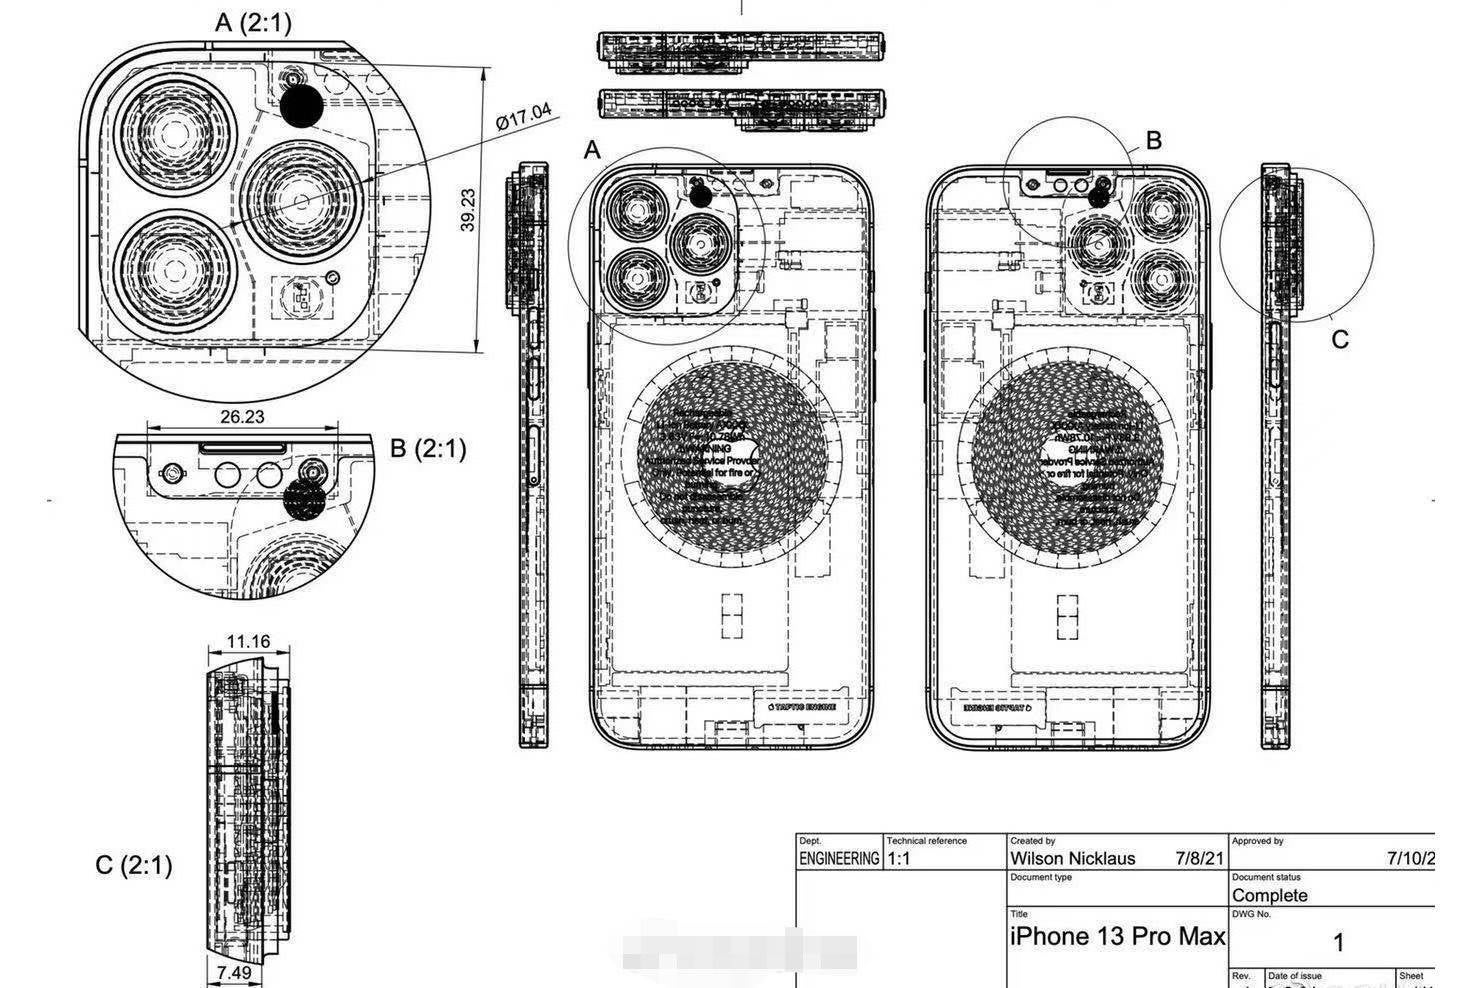 Alleged iPhone 13 Pro Max design sketch - New images claim to show the back of the Rose Gold iPhone 13 Pro